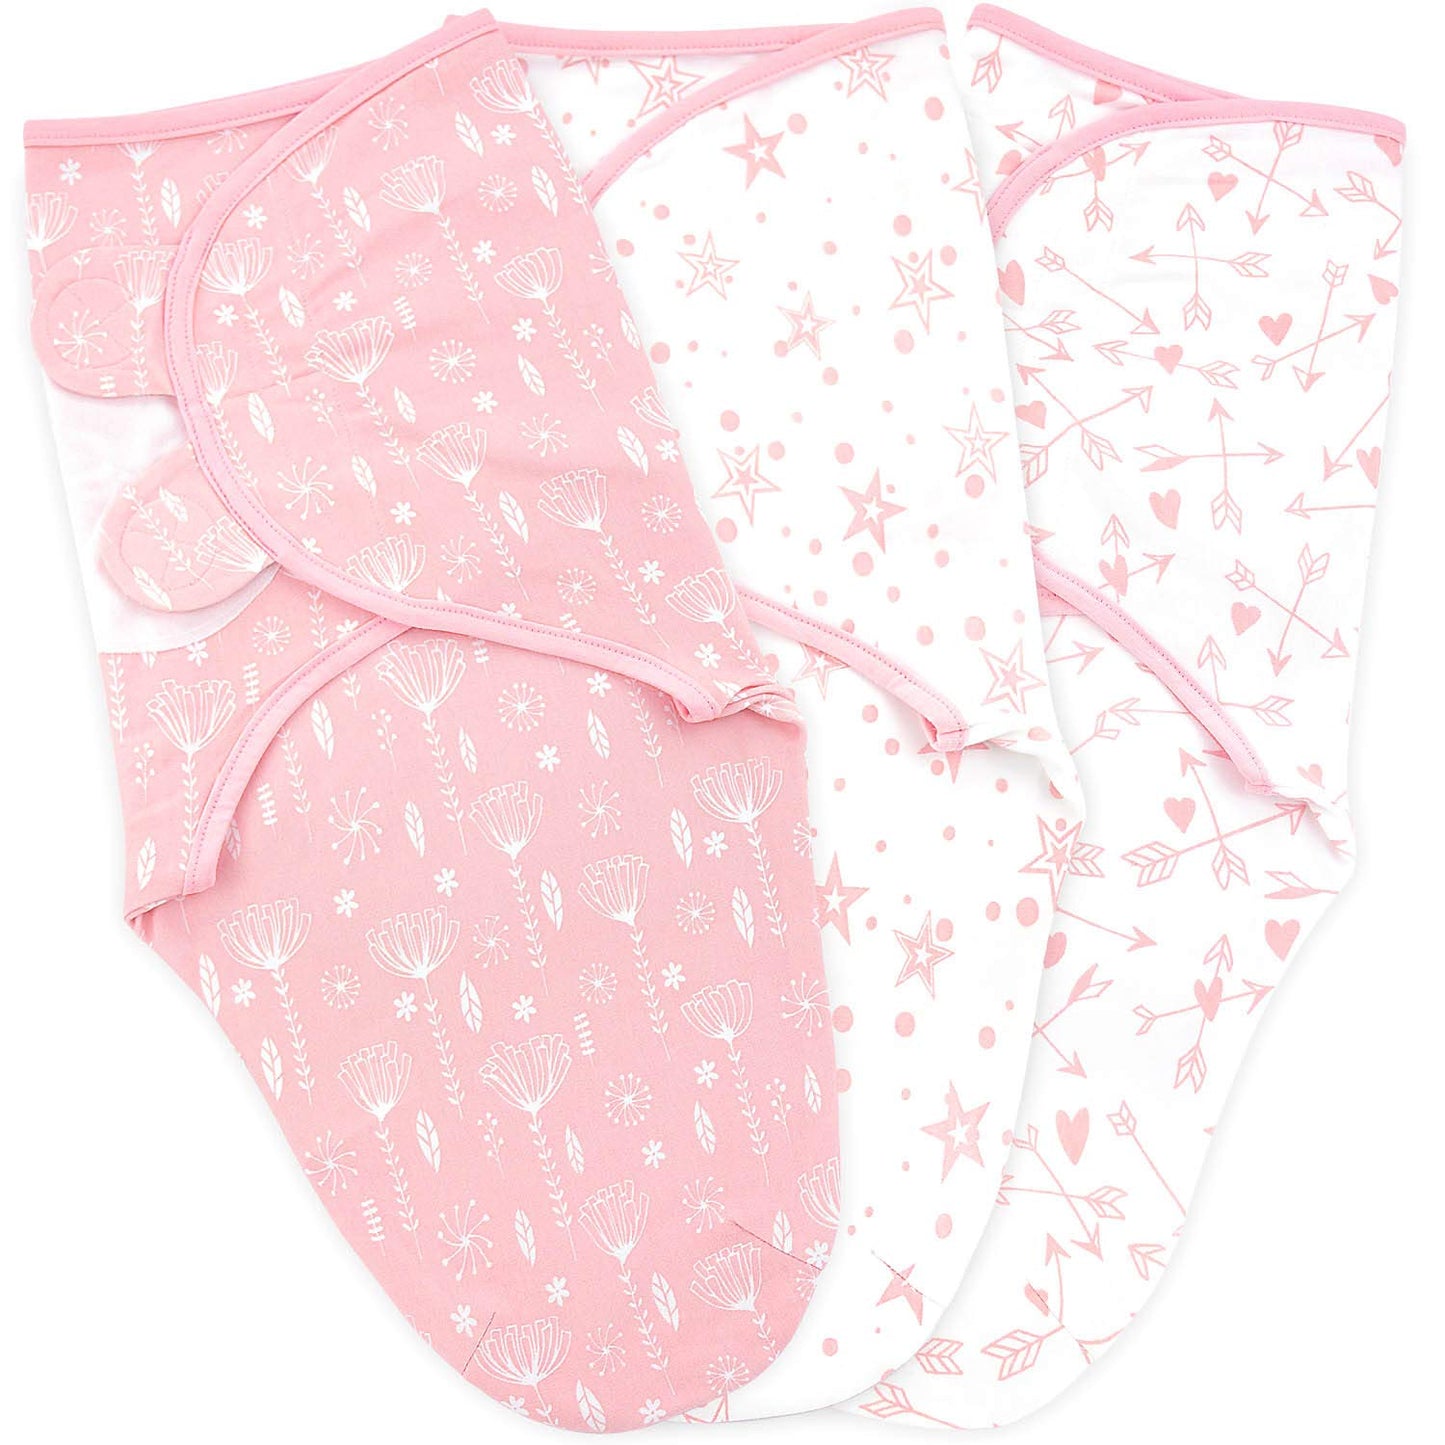 "Cozy and Stylish Baby Swaddle Blanket Set - Perfect for Newborns! Includes 3 Adorable Swaddles in Rose Pink. Ideal for Infants 0-3 Months. Adjustable and Comfortable Sleep Sack for Boys and Girls."